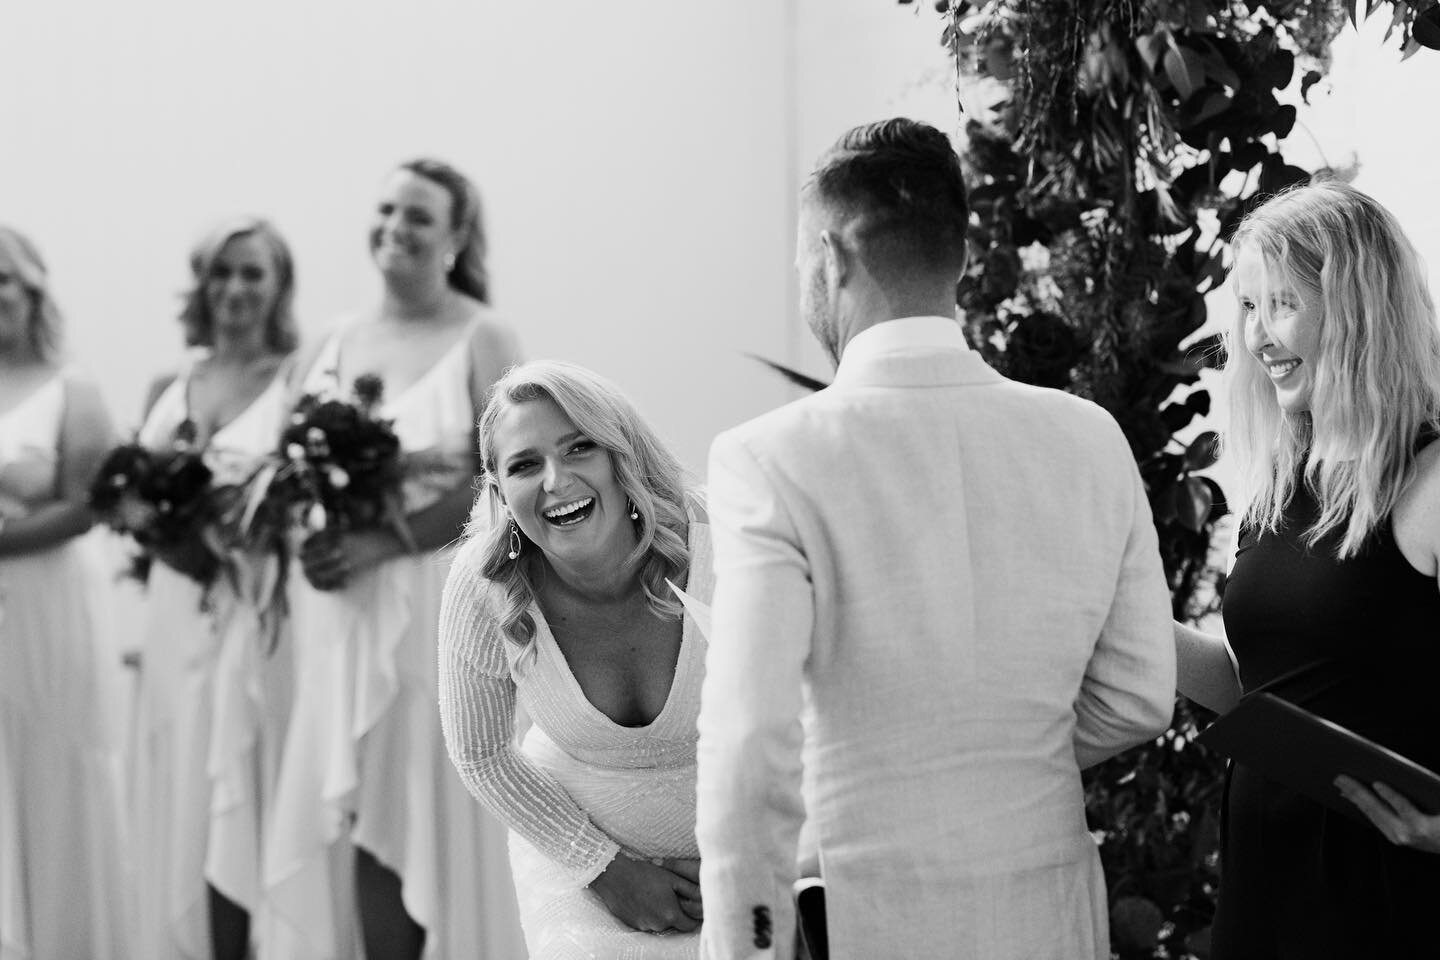 So many of my couples are understandably nervous when they decide to write their own vows. But they never cease to amaze me at how beautiful, funny and heartfelt they are. You&rsquo;re all a bunch of poets!

📷 @scotthorsburghphoto @artofgracewedding